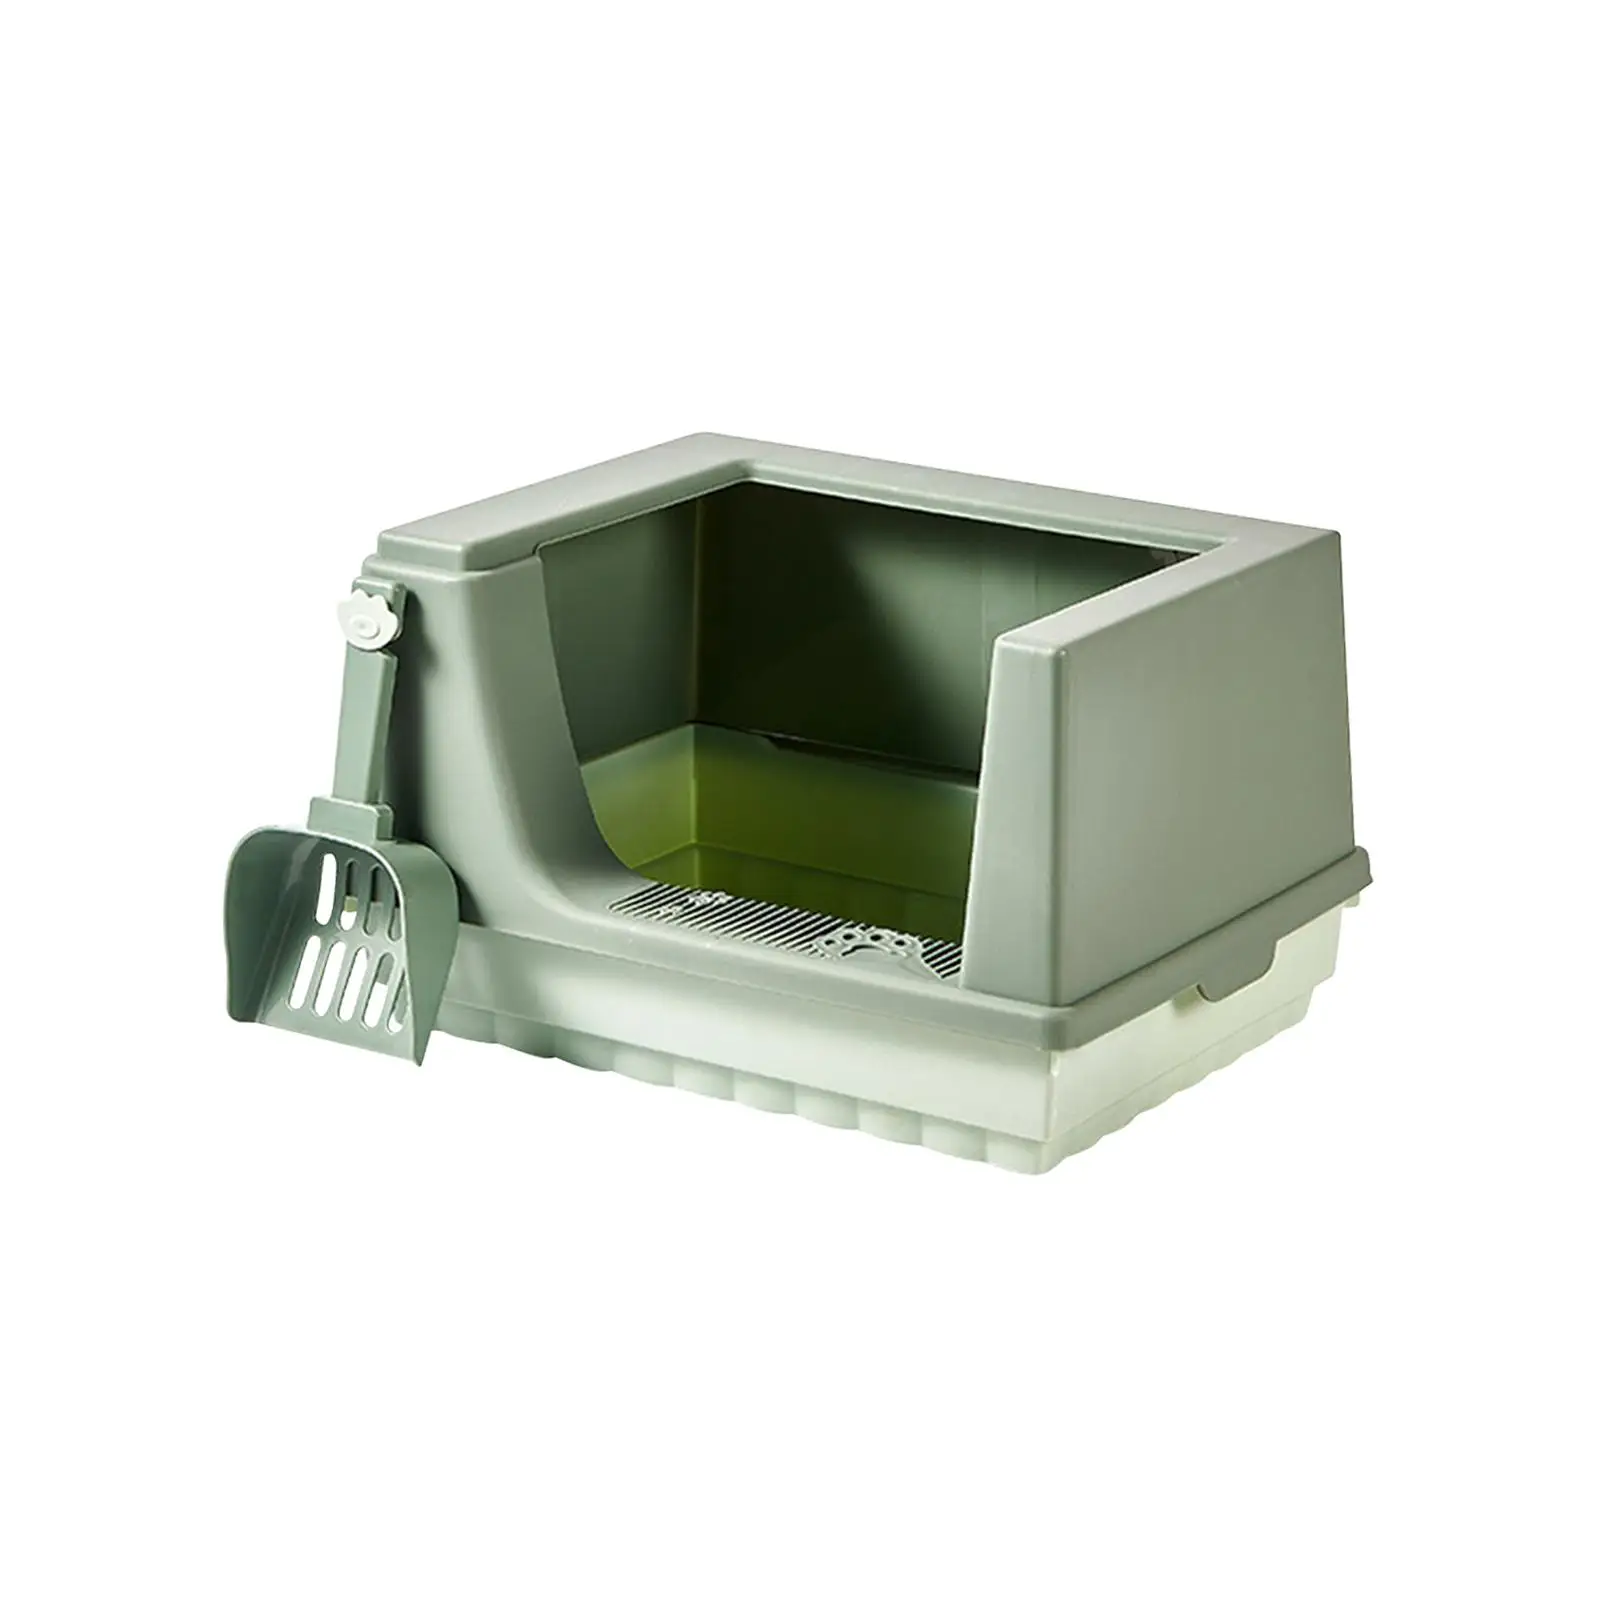 Cat Litter Box Tray Toilet Semi Enclosed with Shovel for Small Rabbit Guinea Pig Polished Interior Portable Anti Durable